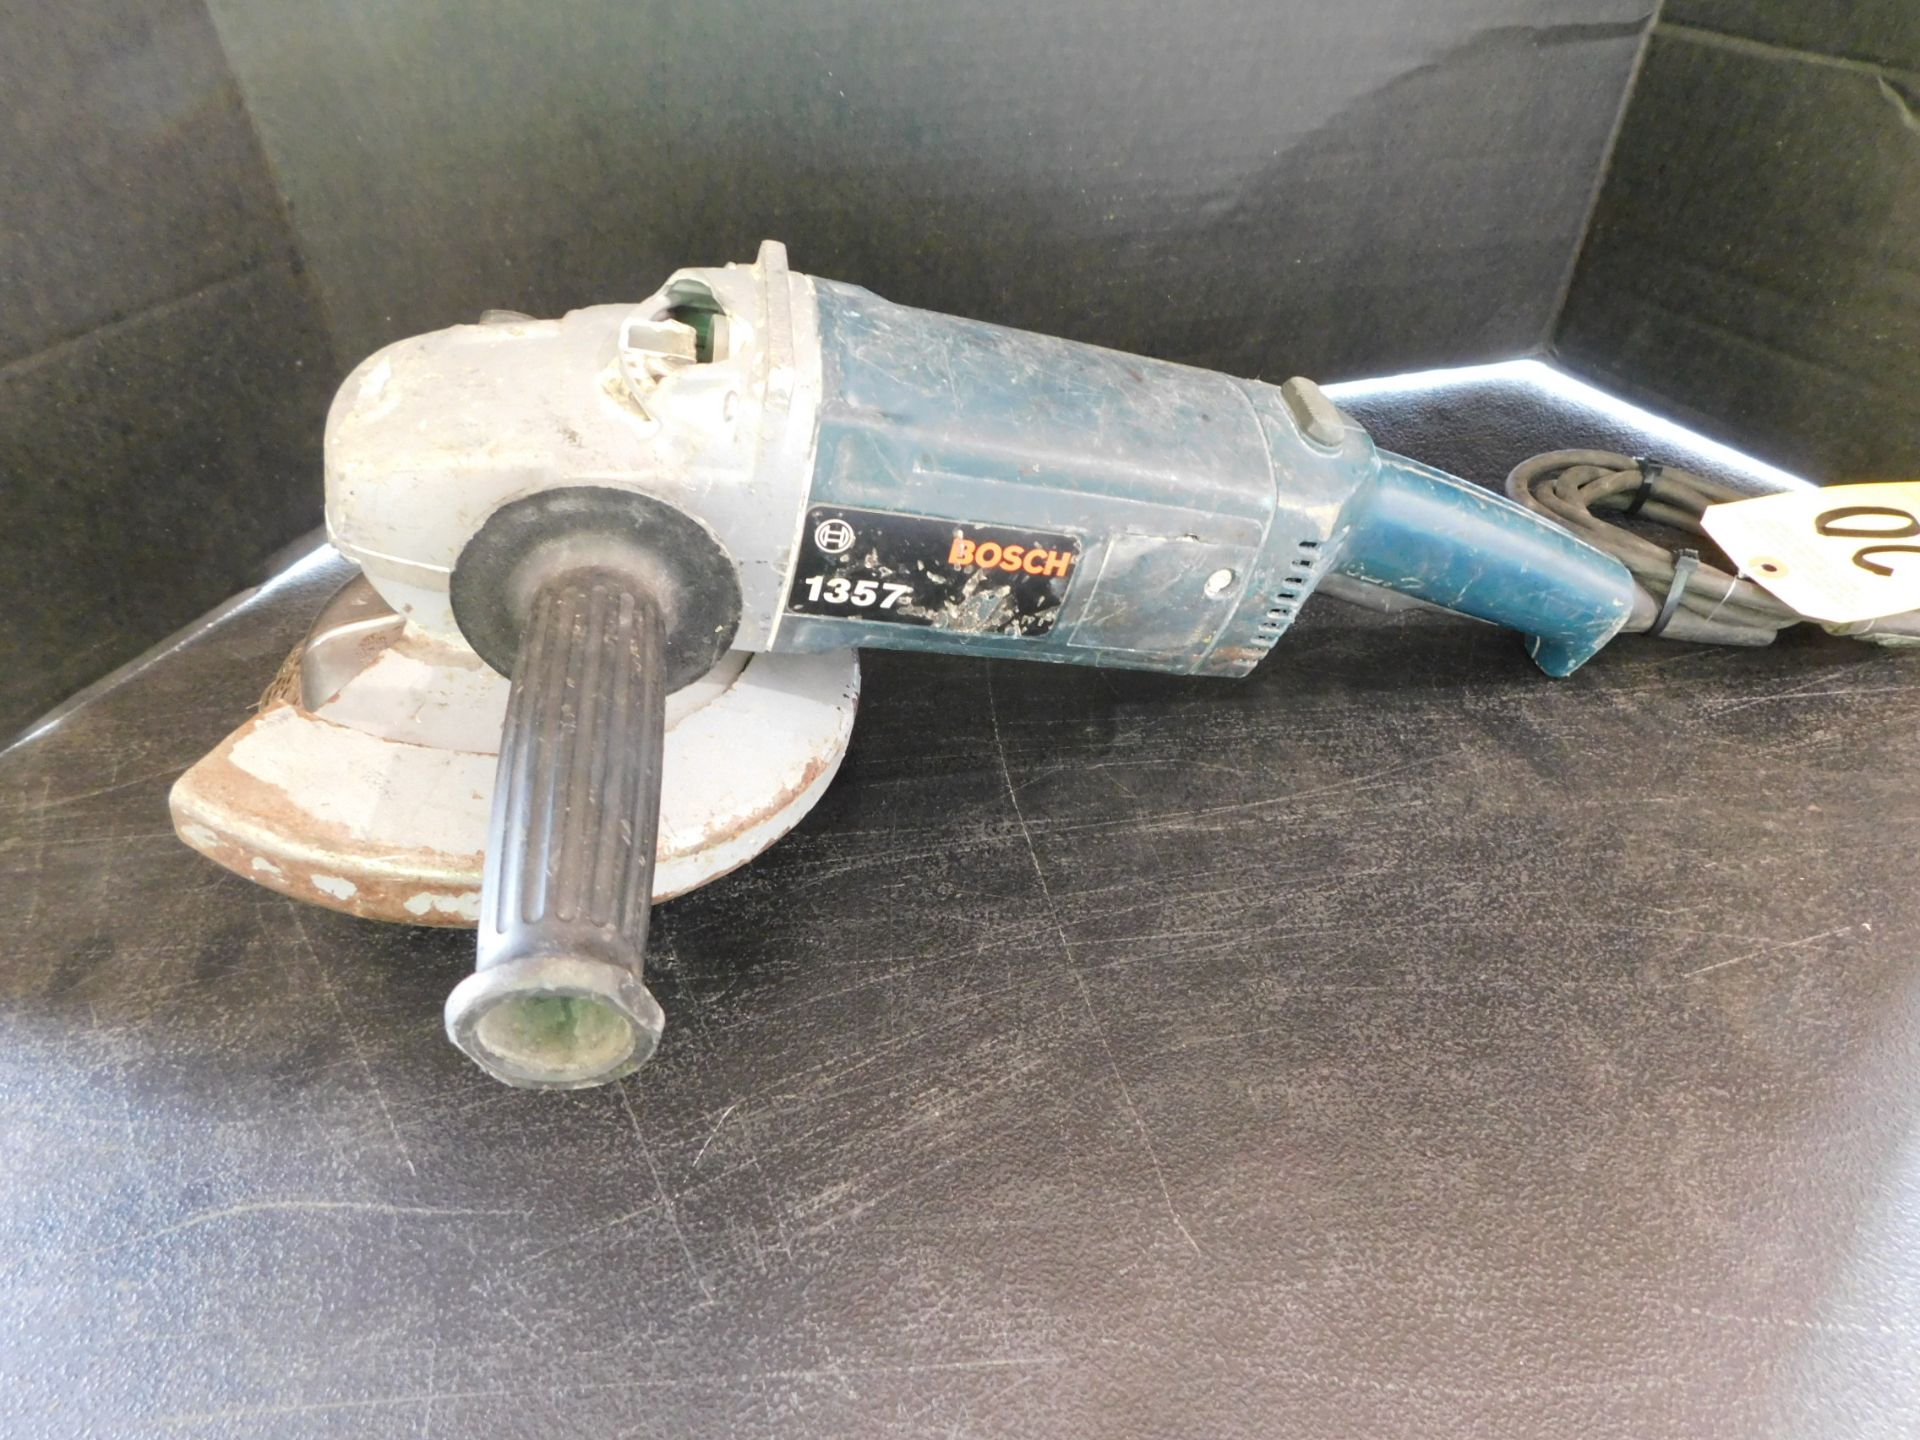 Bosch 1357 7" Right Angle Grinder